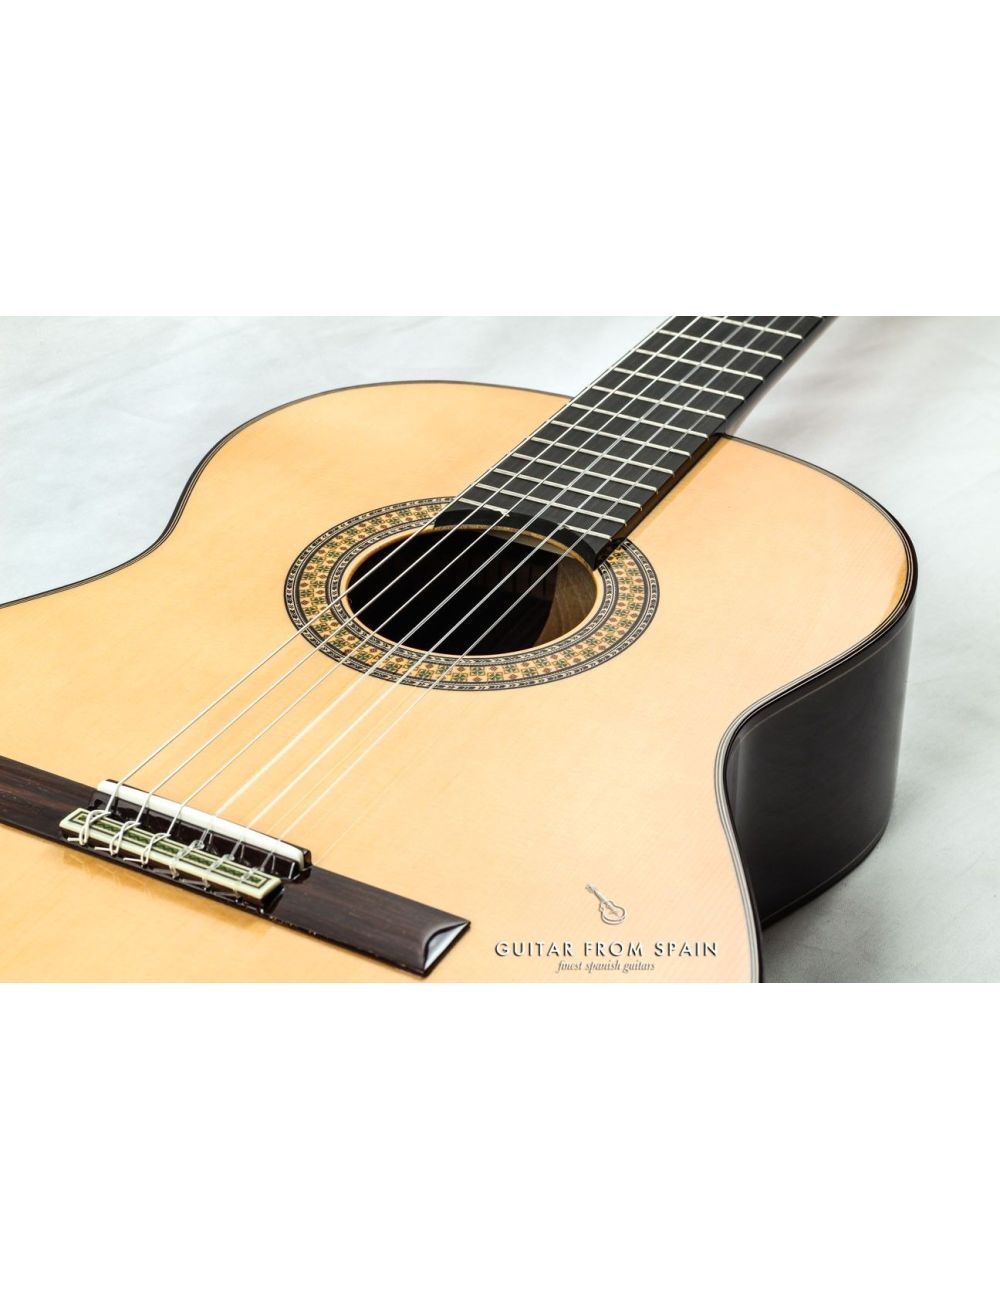 Alhambra 9PA Classical Guitar 9PA Concert Classical